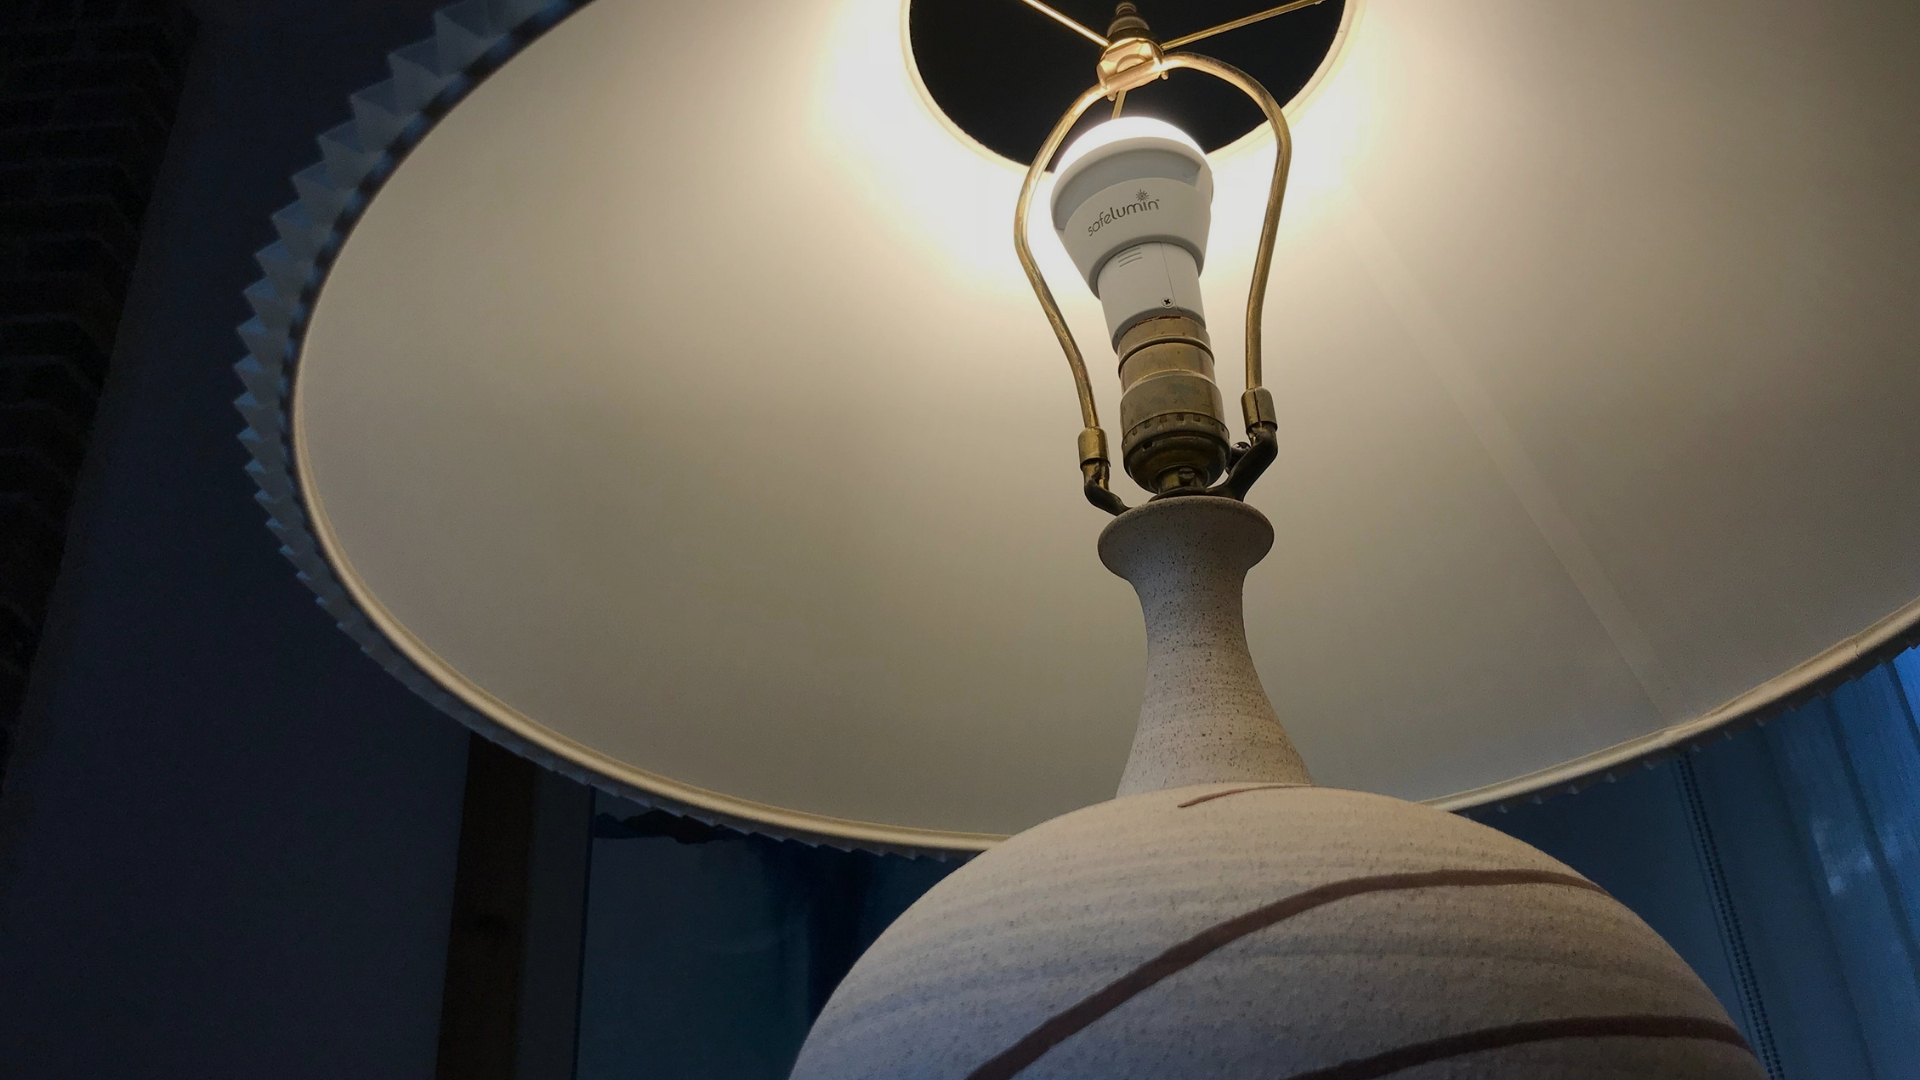 Rely-A-Light. The lamp that works when the power goes out